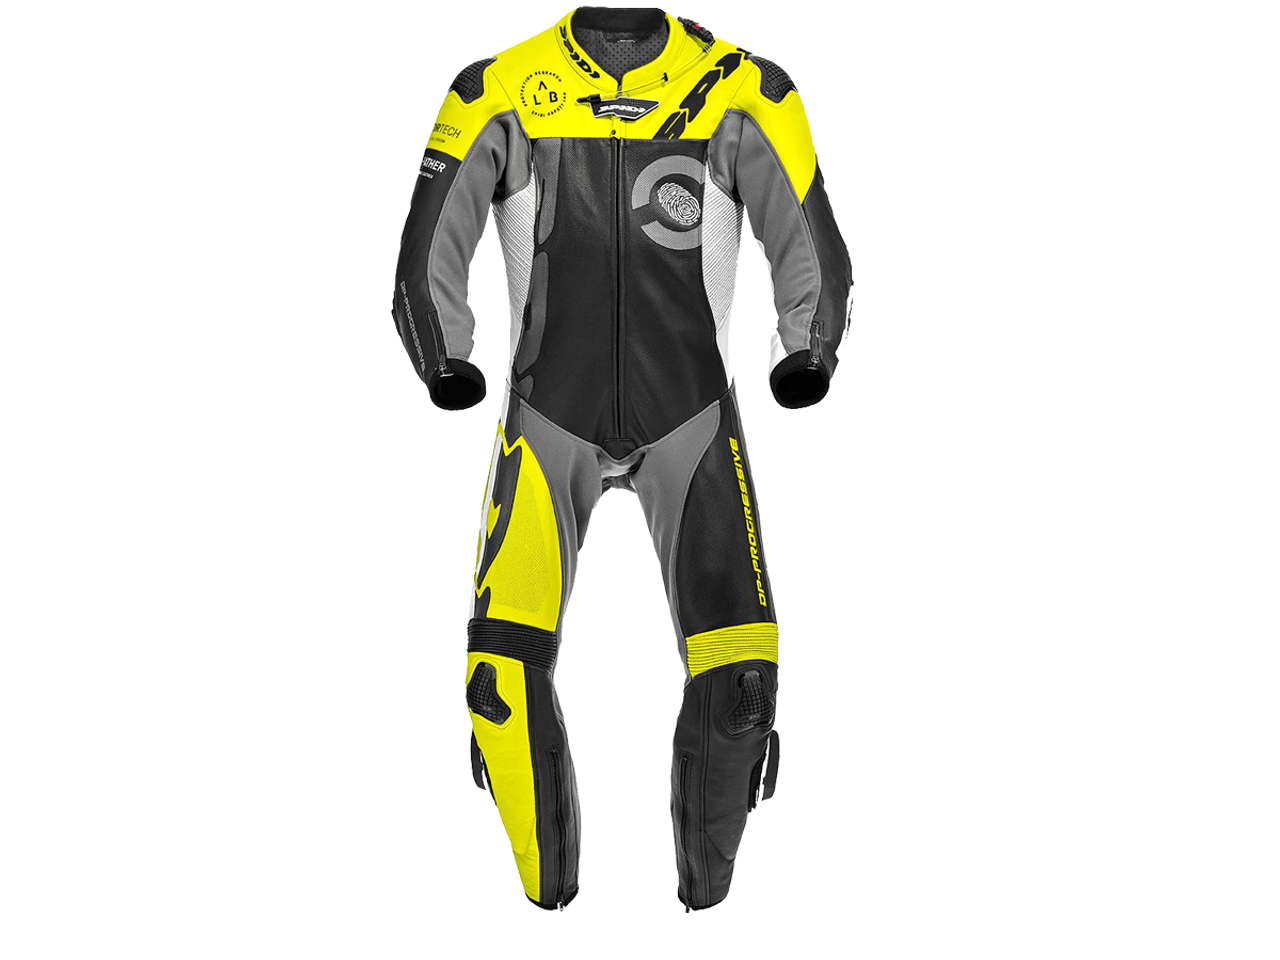 Spidi Track Wind Pro Motorcycle Racing Leather Suit Black/White/Neon/Red